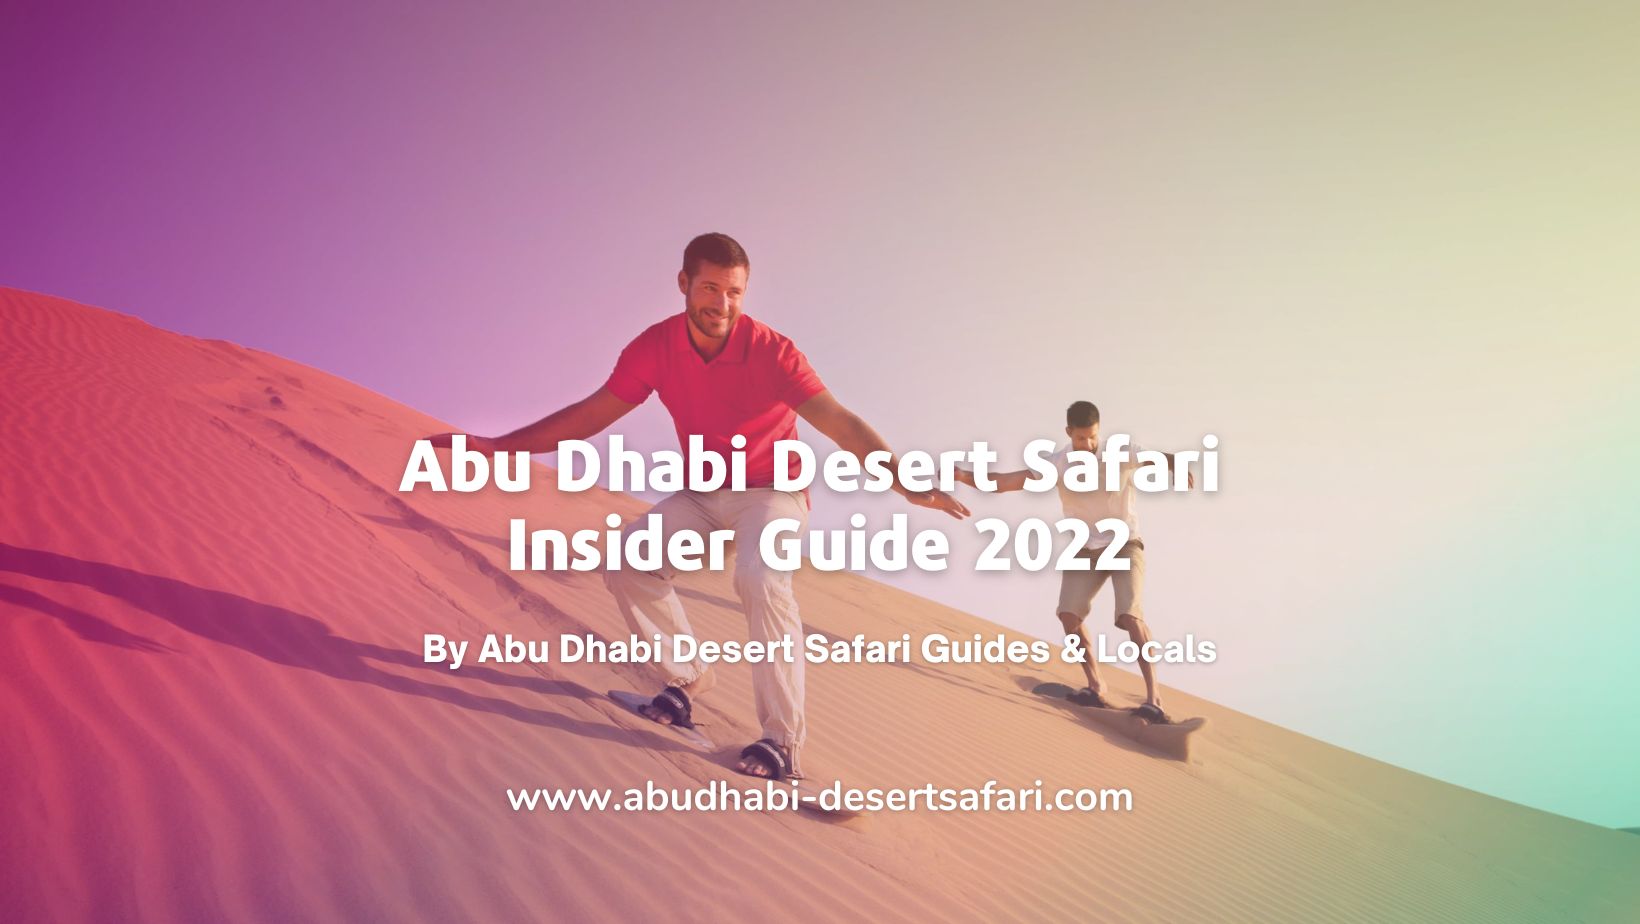 What you need to know about Abu Dhabi Desert Safari Insider Guide 2023